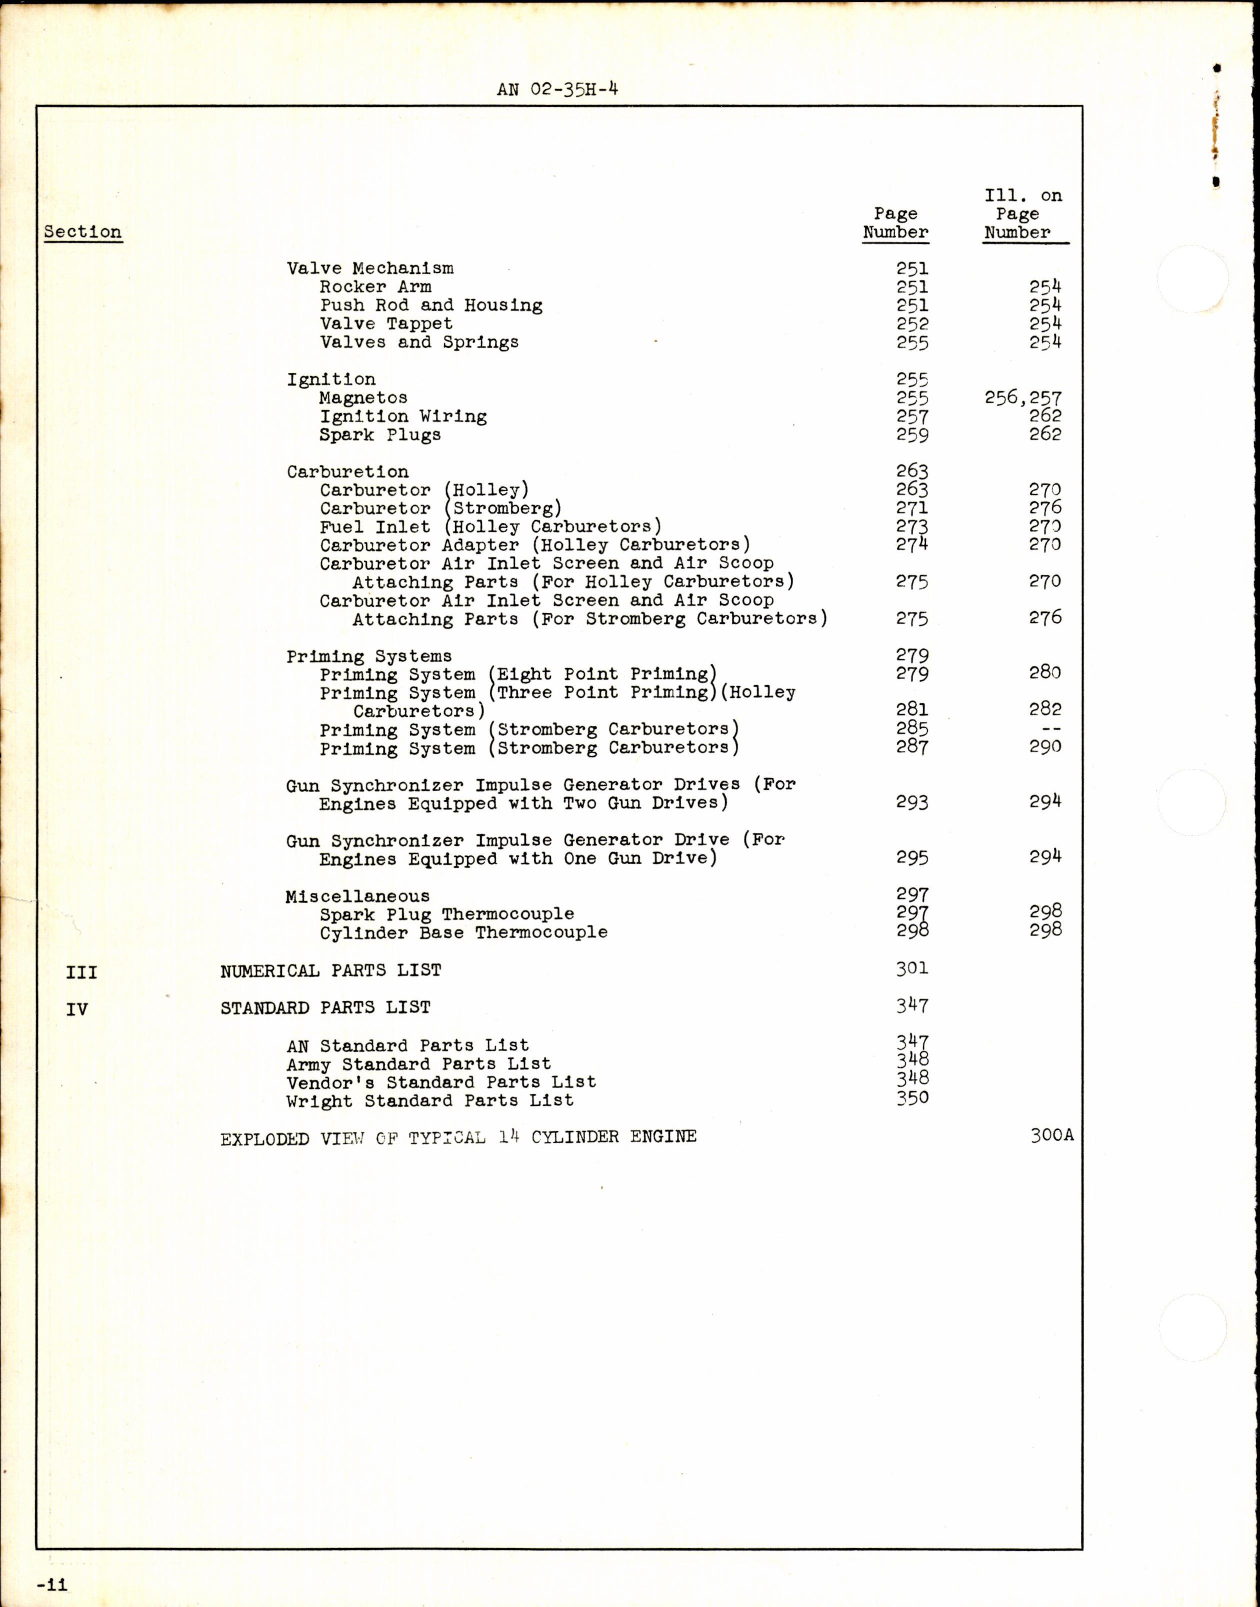 Sample page 4 from AirCorps Library document: Parts Catalog for Models R-2600-8